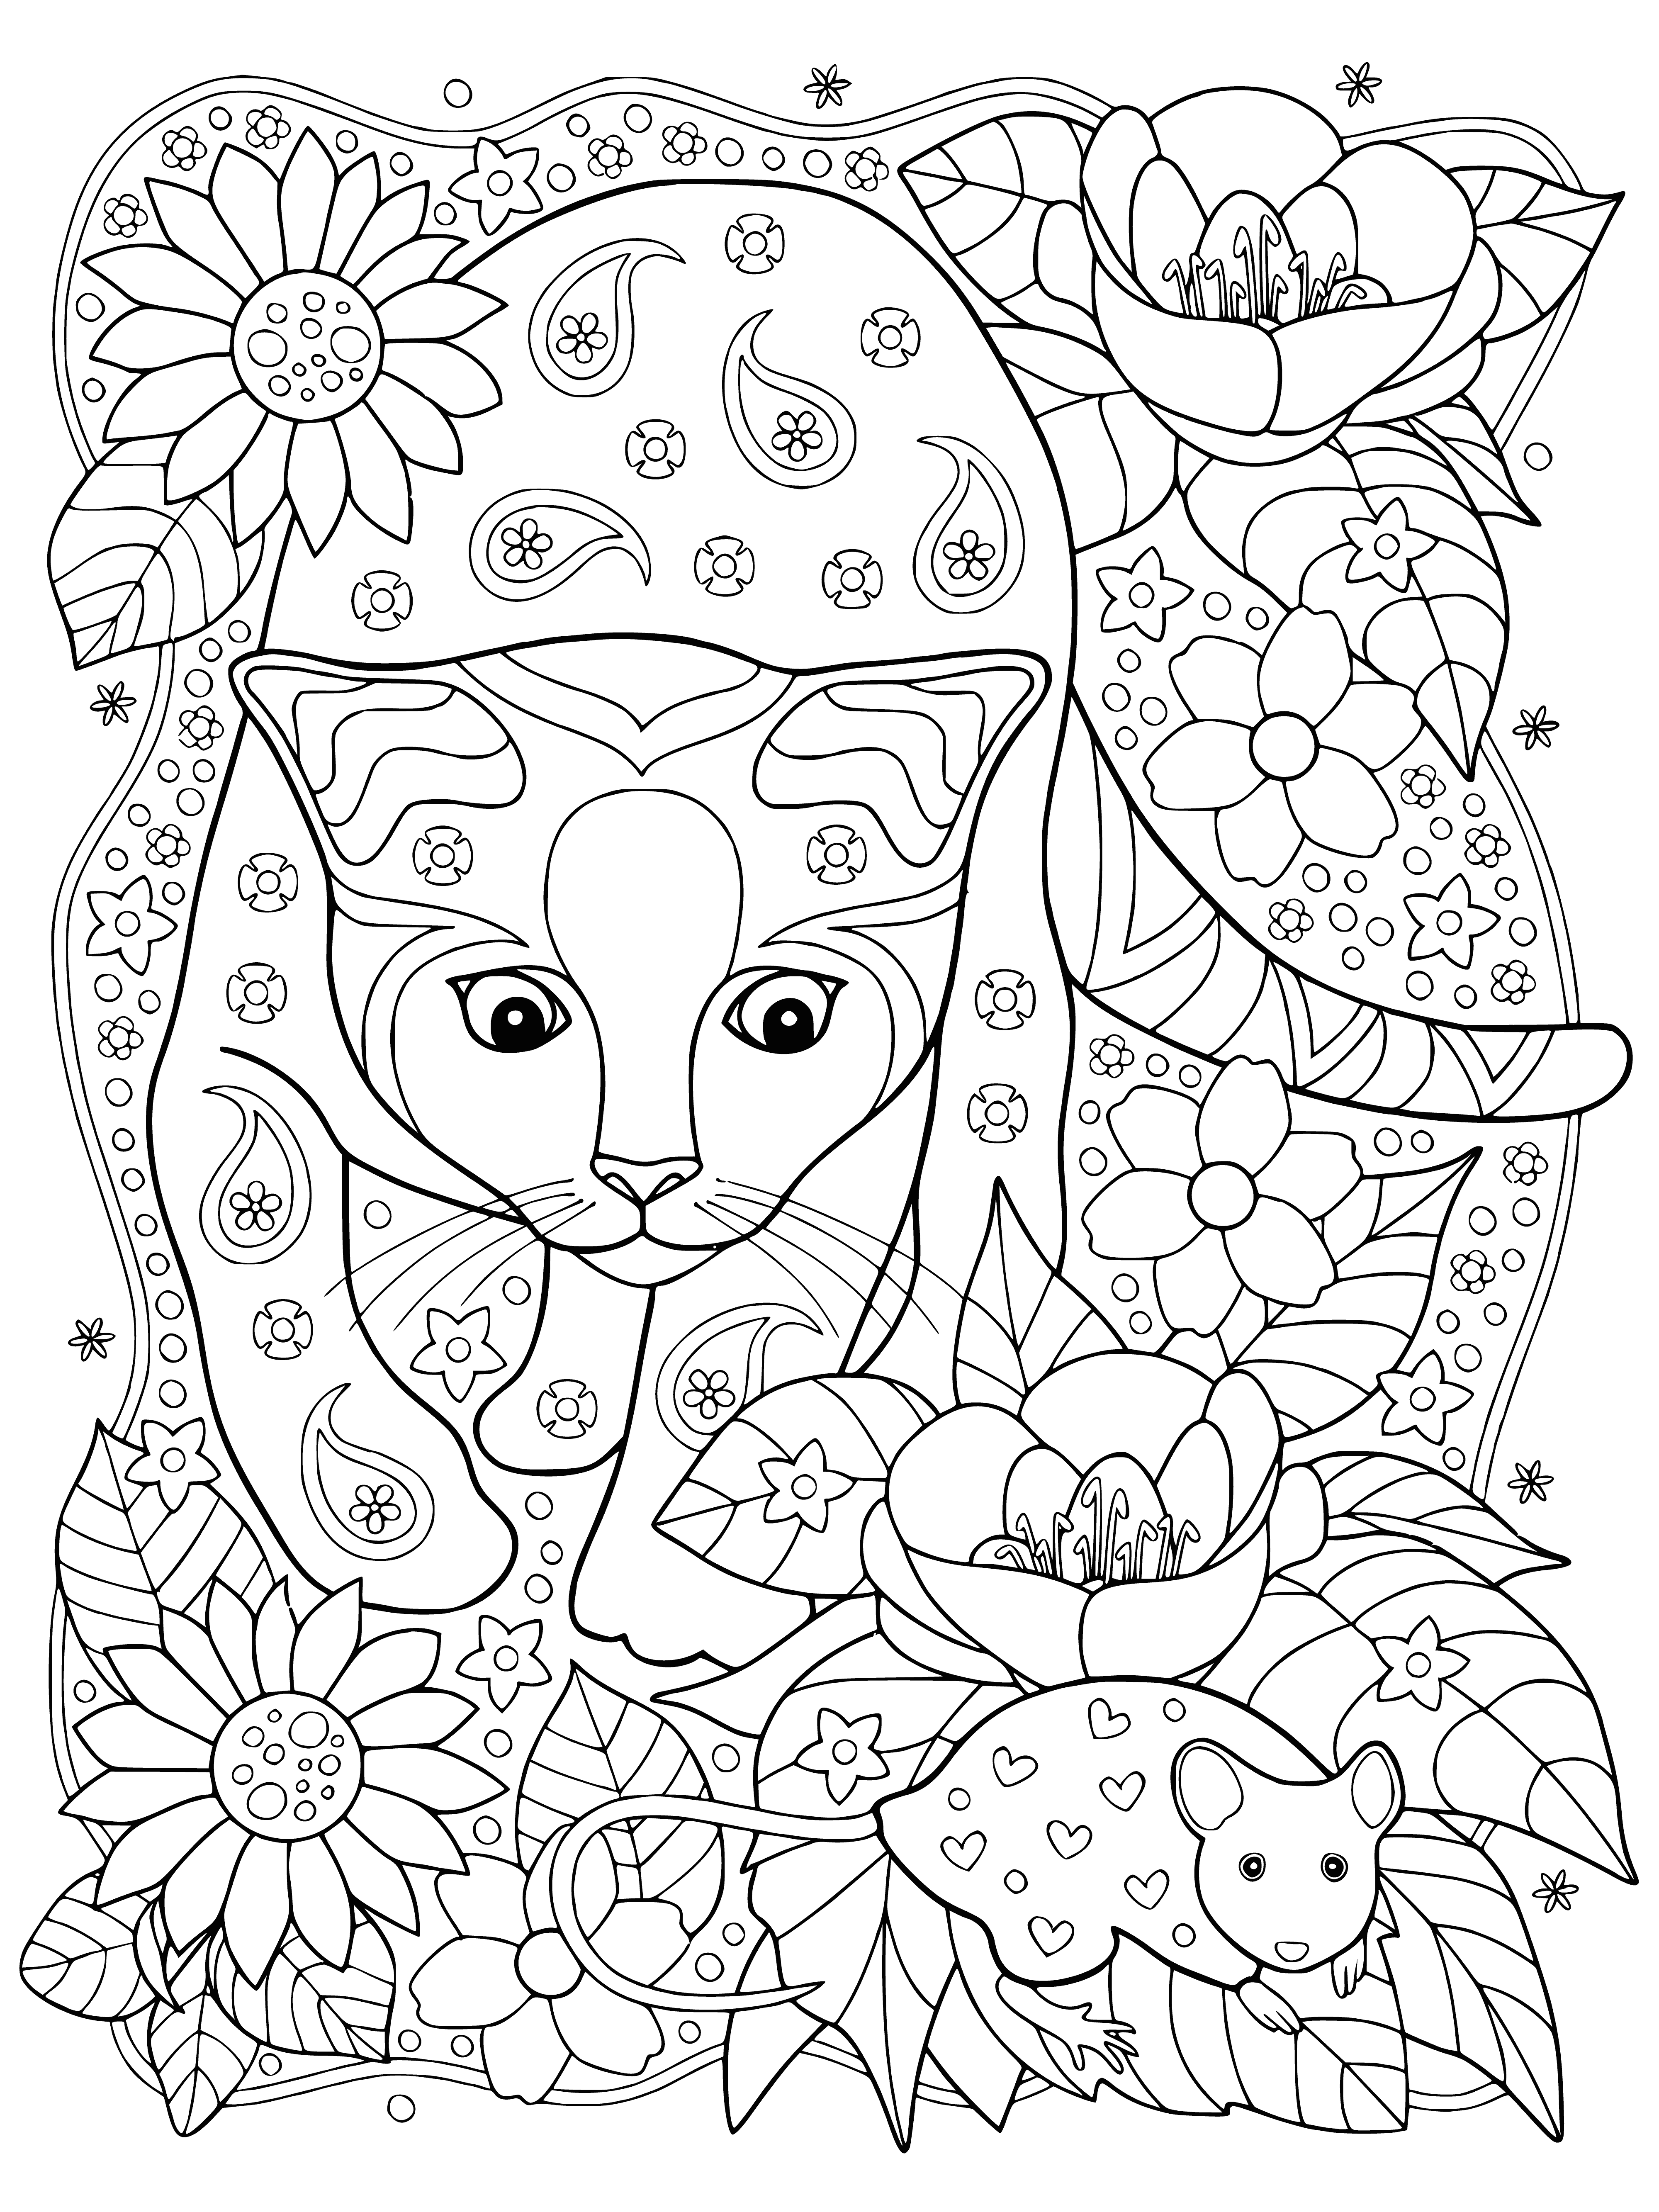 The cat is tracking the mouse coloring page